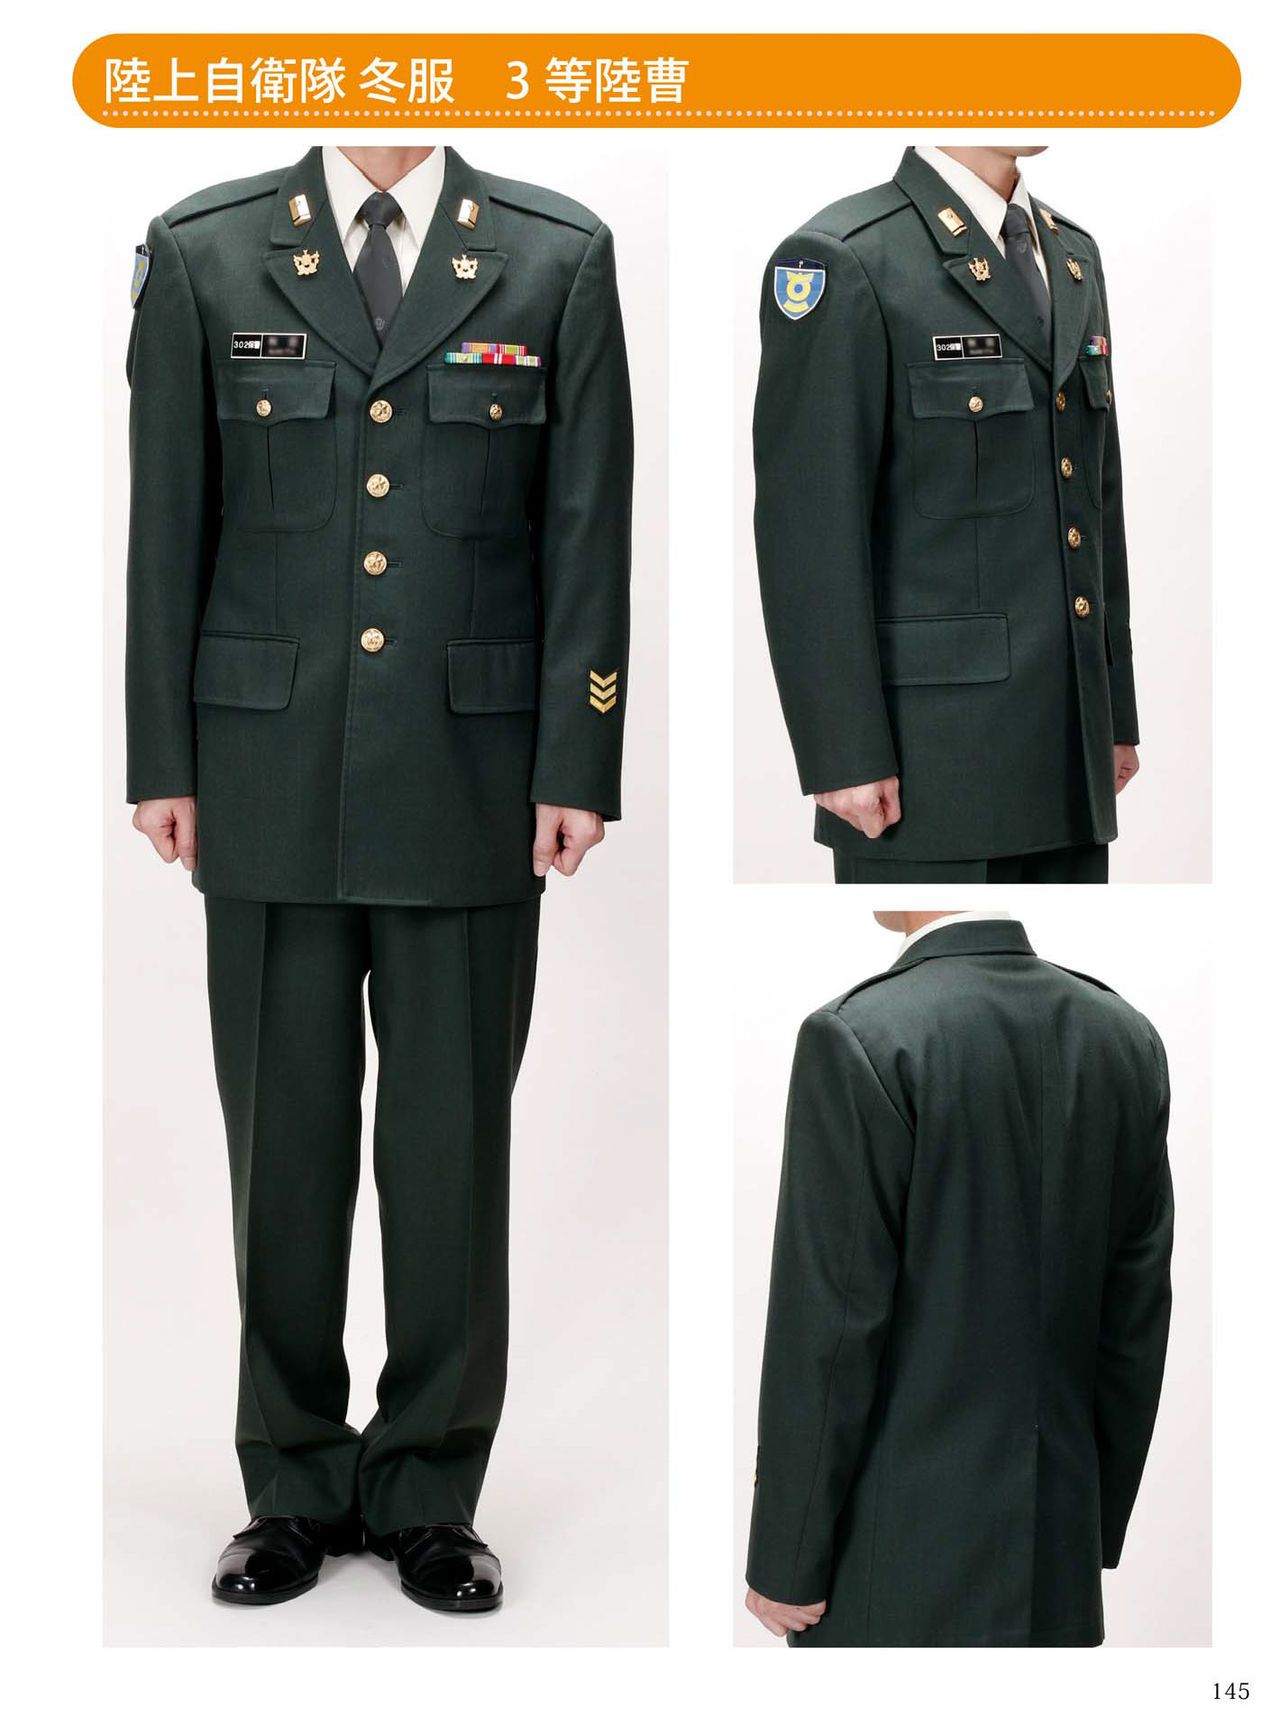 How to draw military uniforms and uniforms From Self-Defense Forces 軍服・制服の描き方 アメリカ軍・自衛隊の制服から戦闘服まで 148